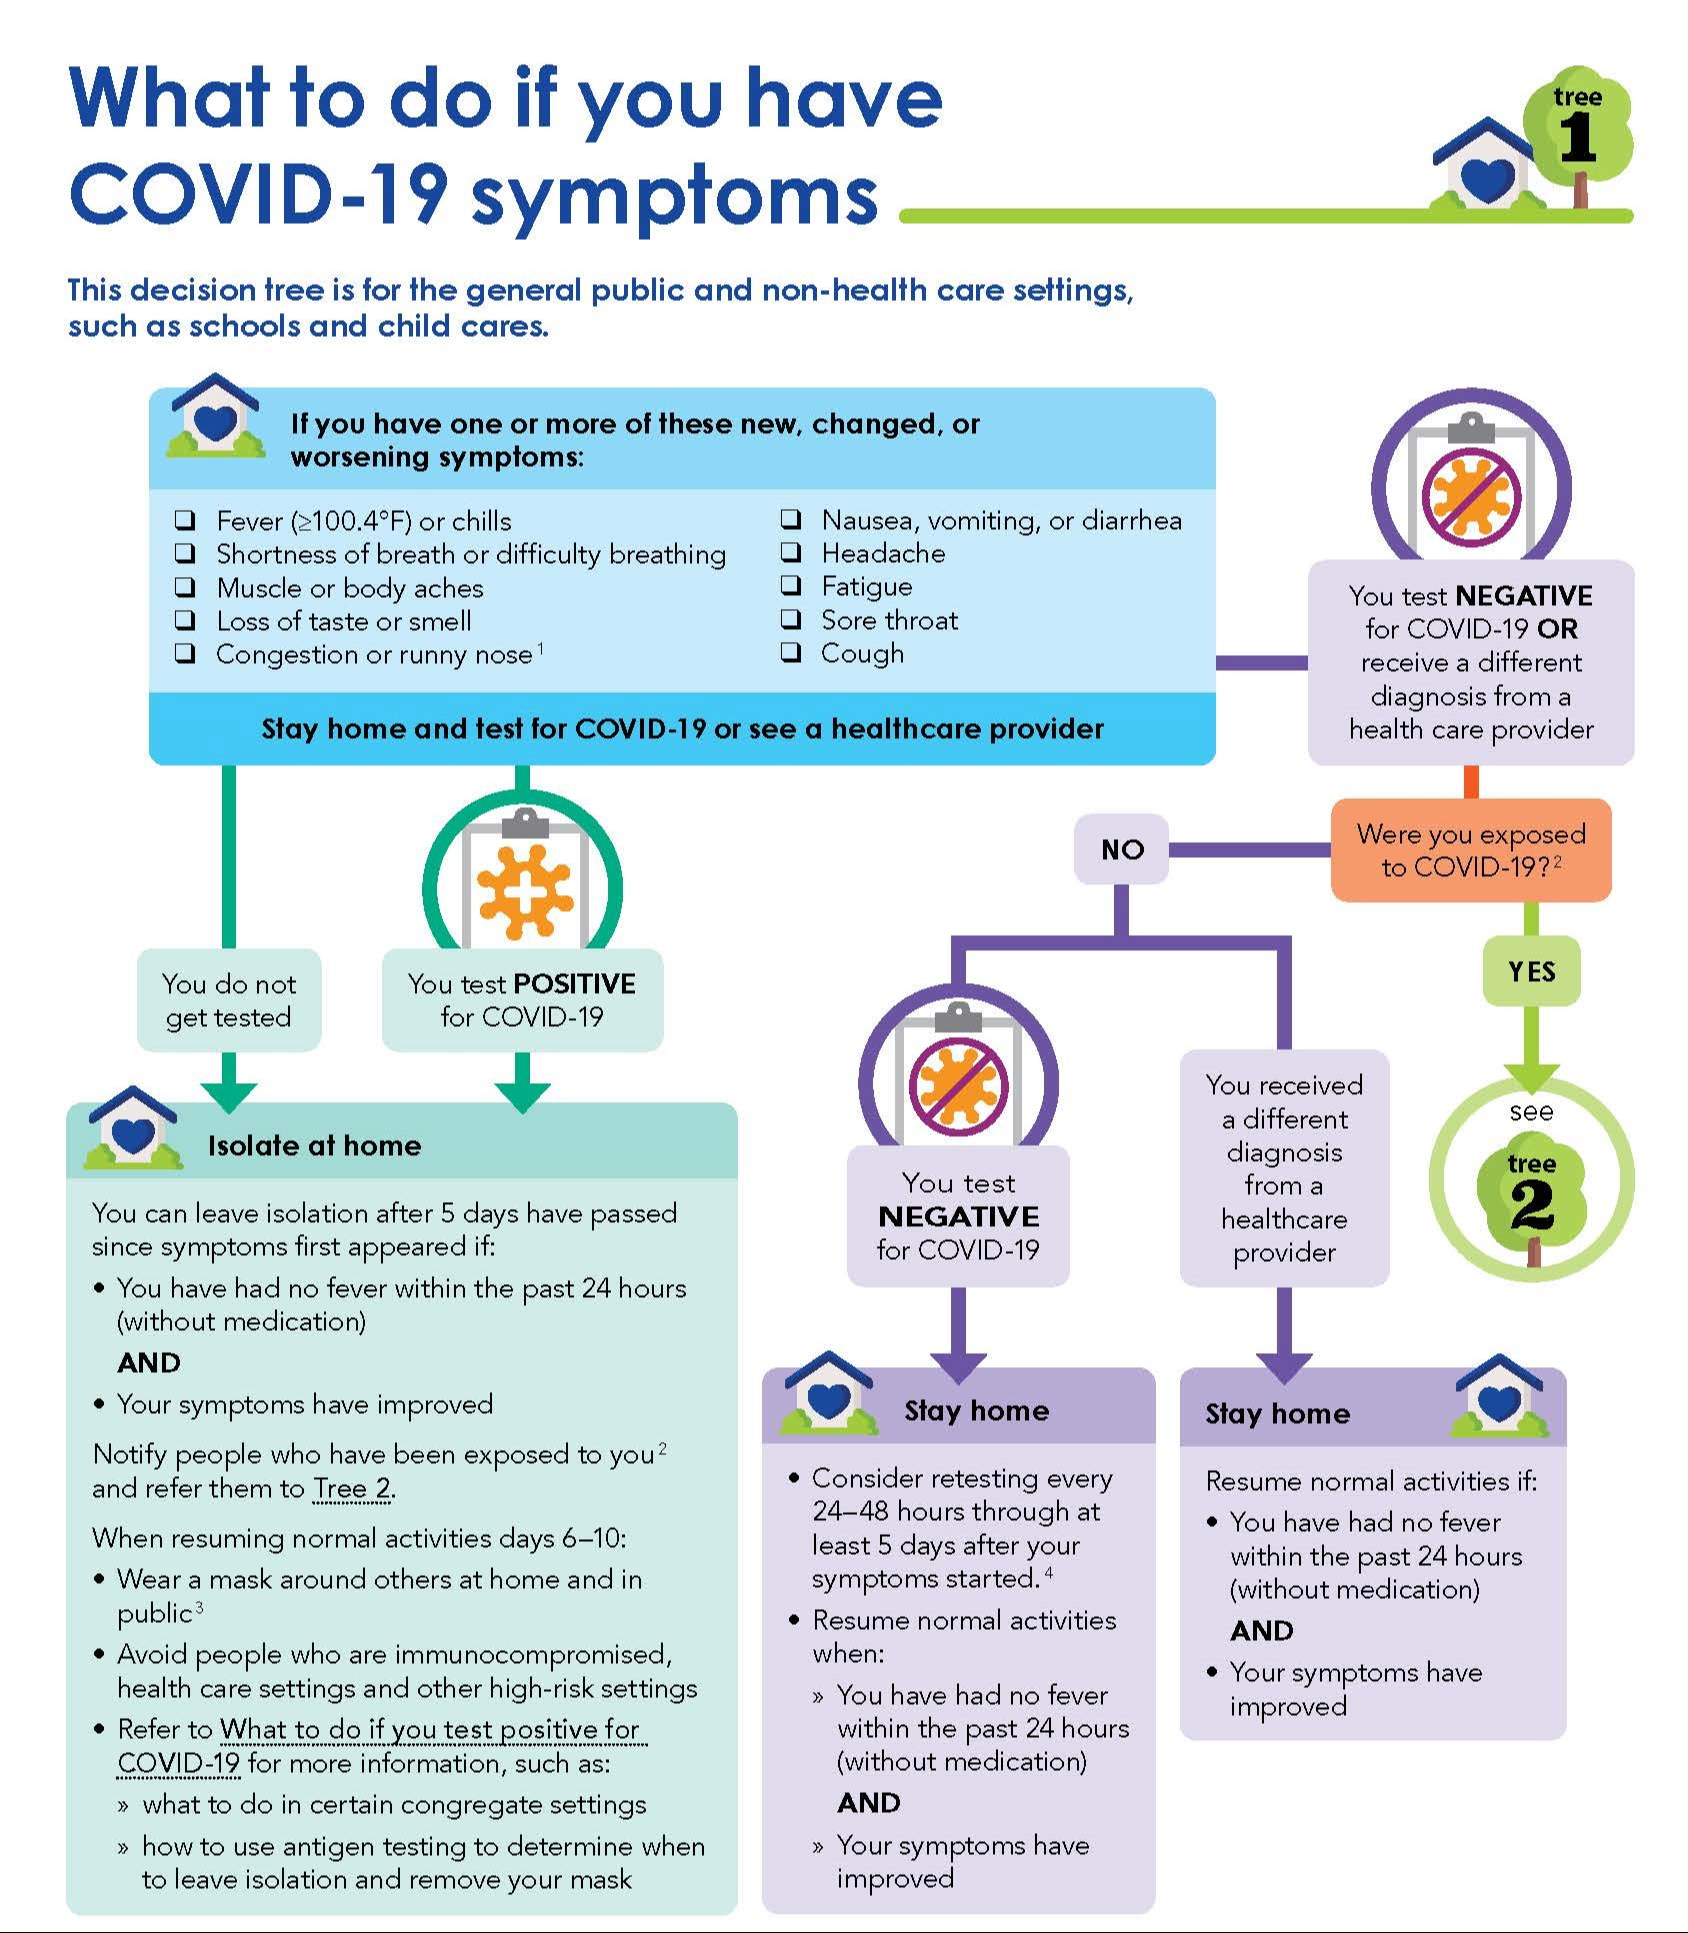 What to do if you have Covid symptoms